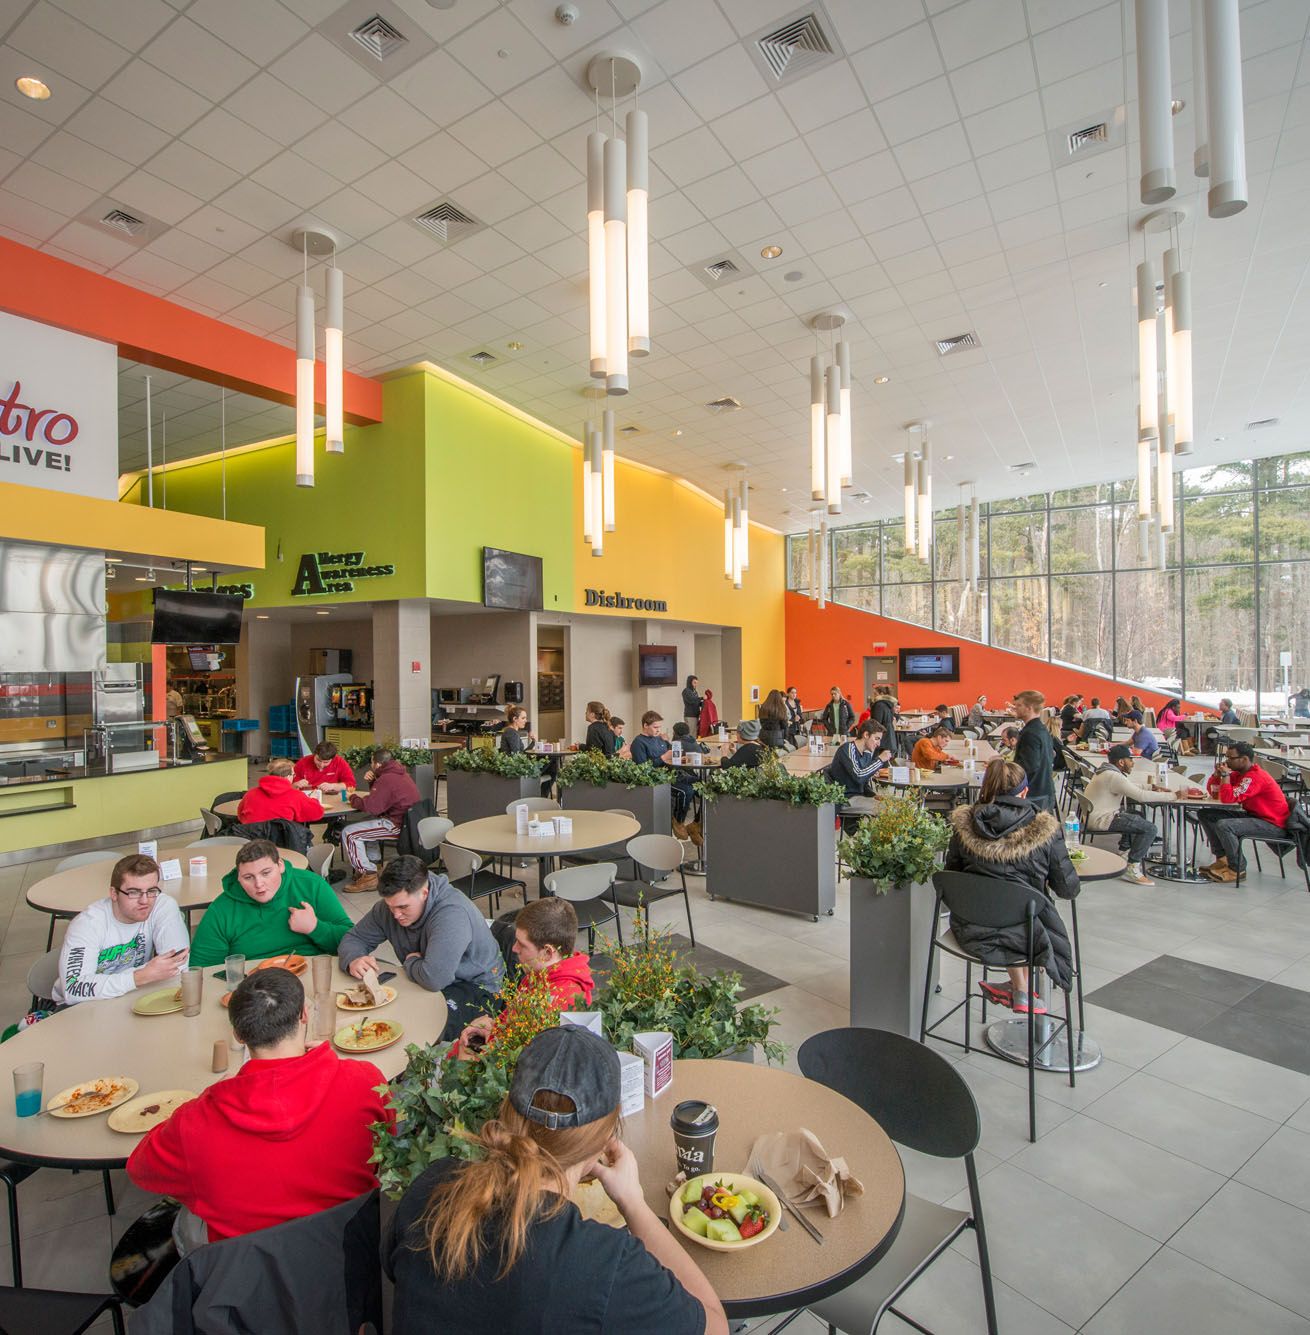 Students eating in dining facilities